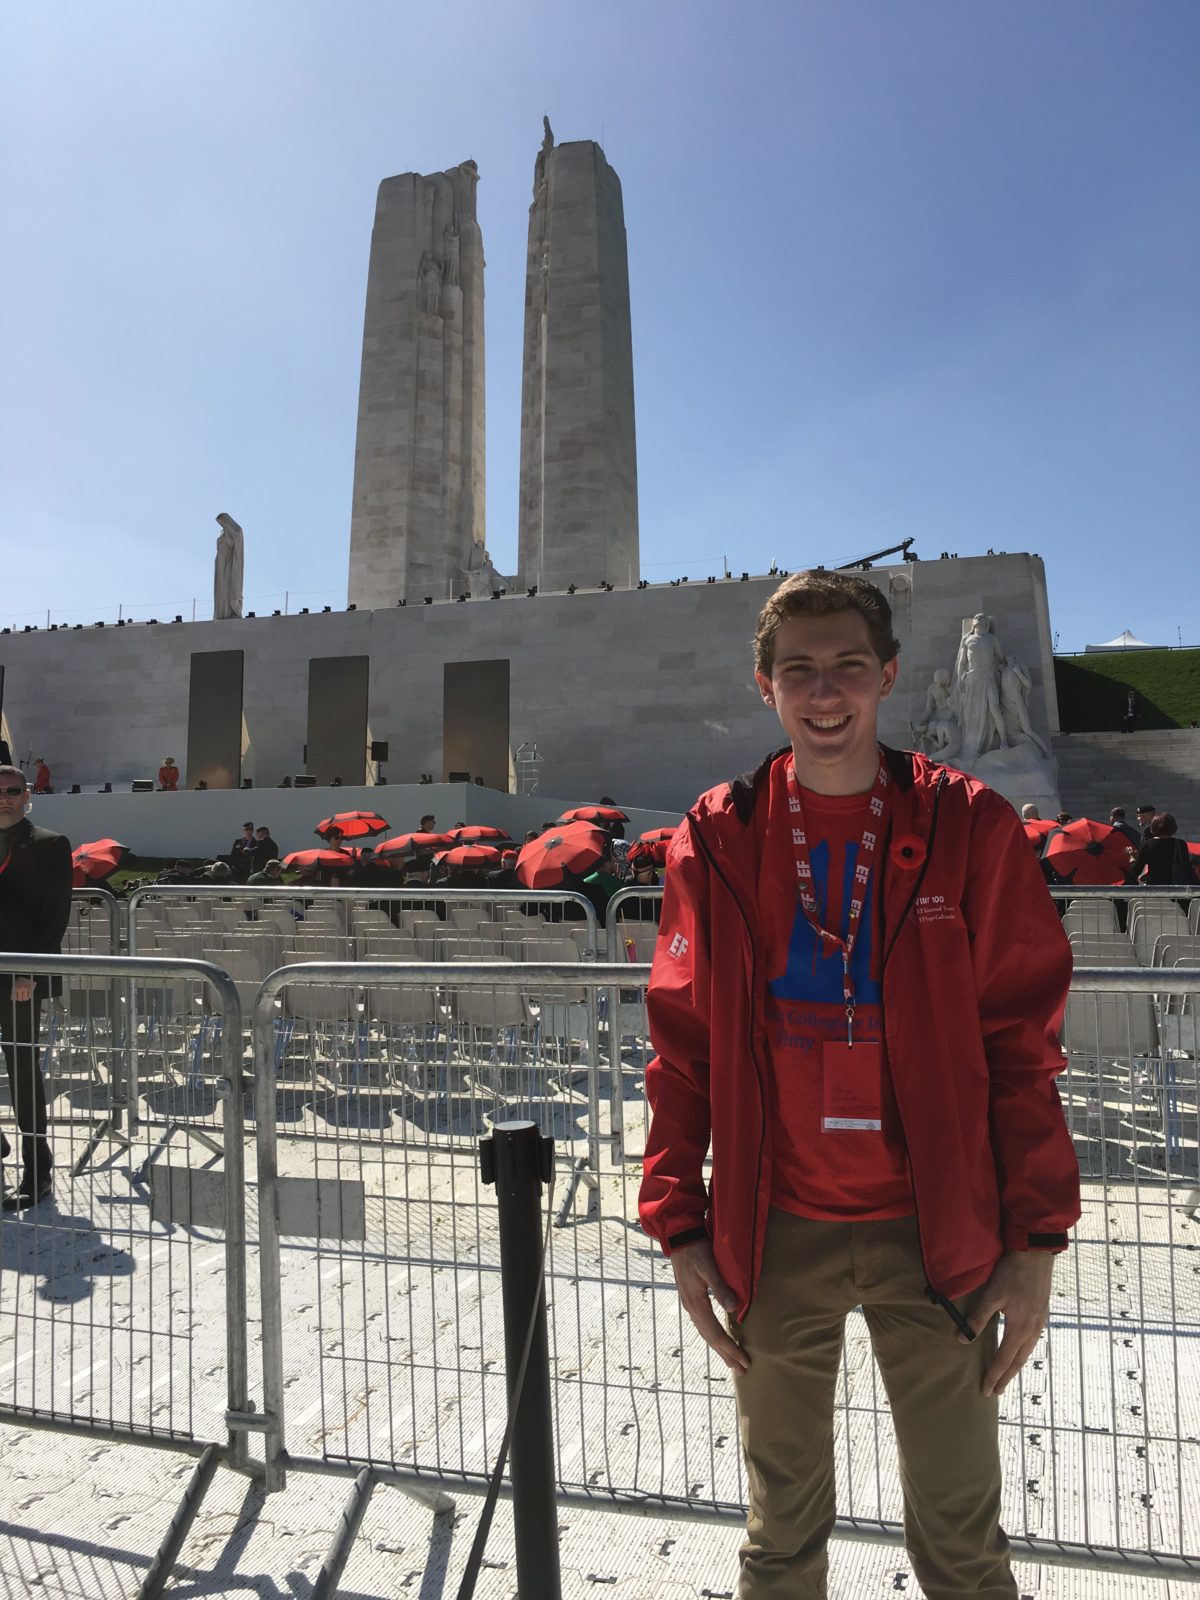 VIMY 100: An Experience That Will Never Be Forgotten